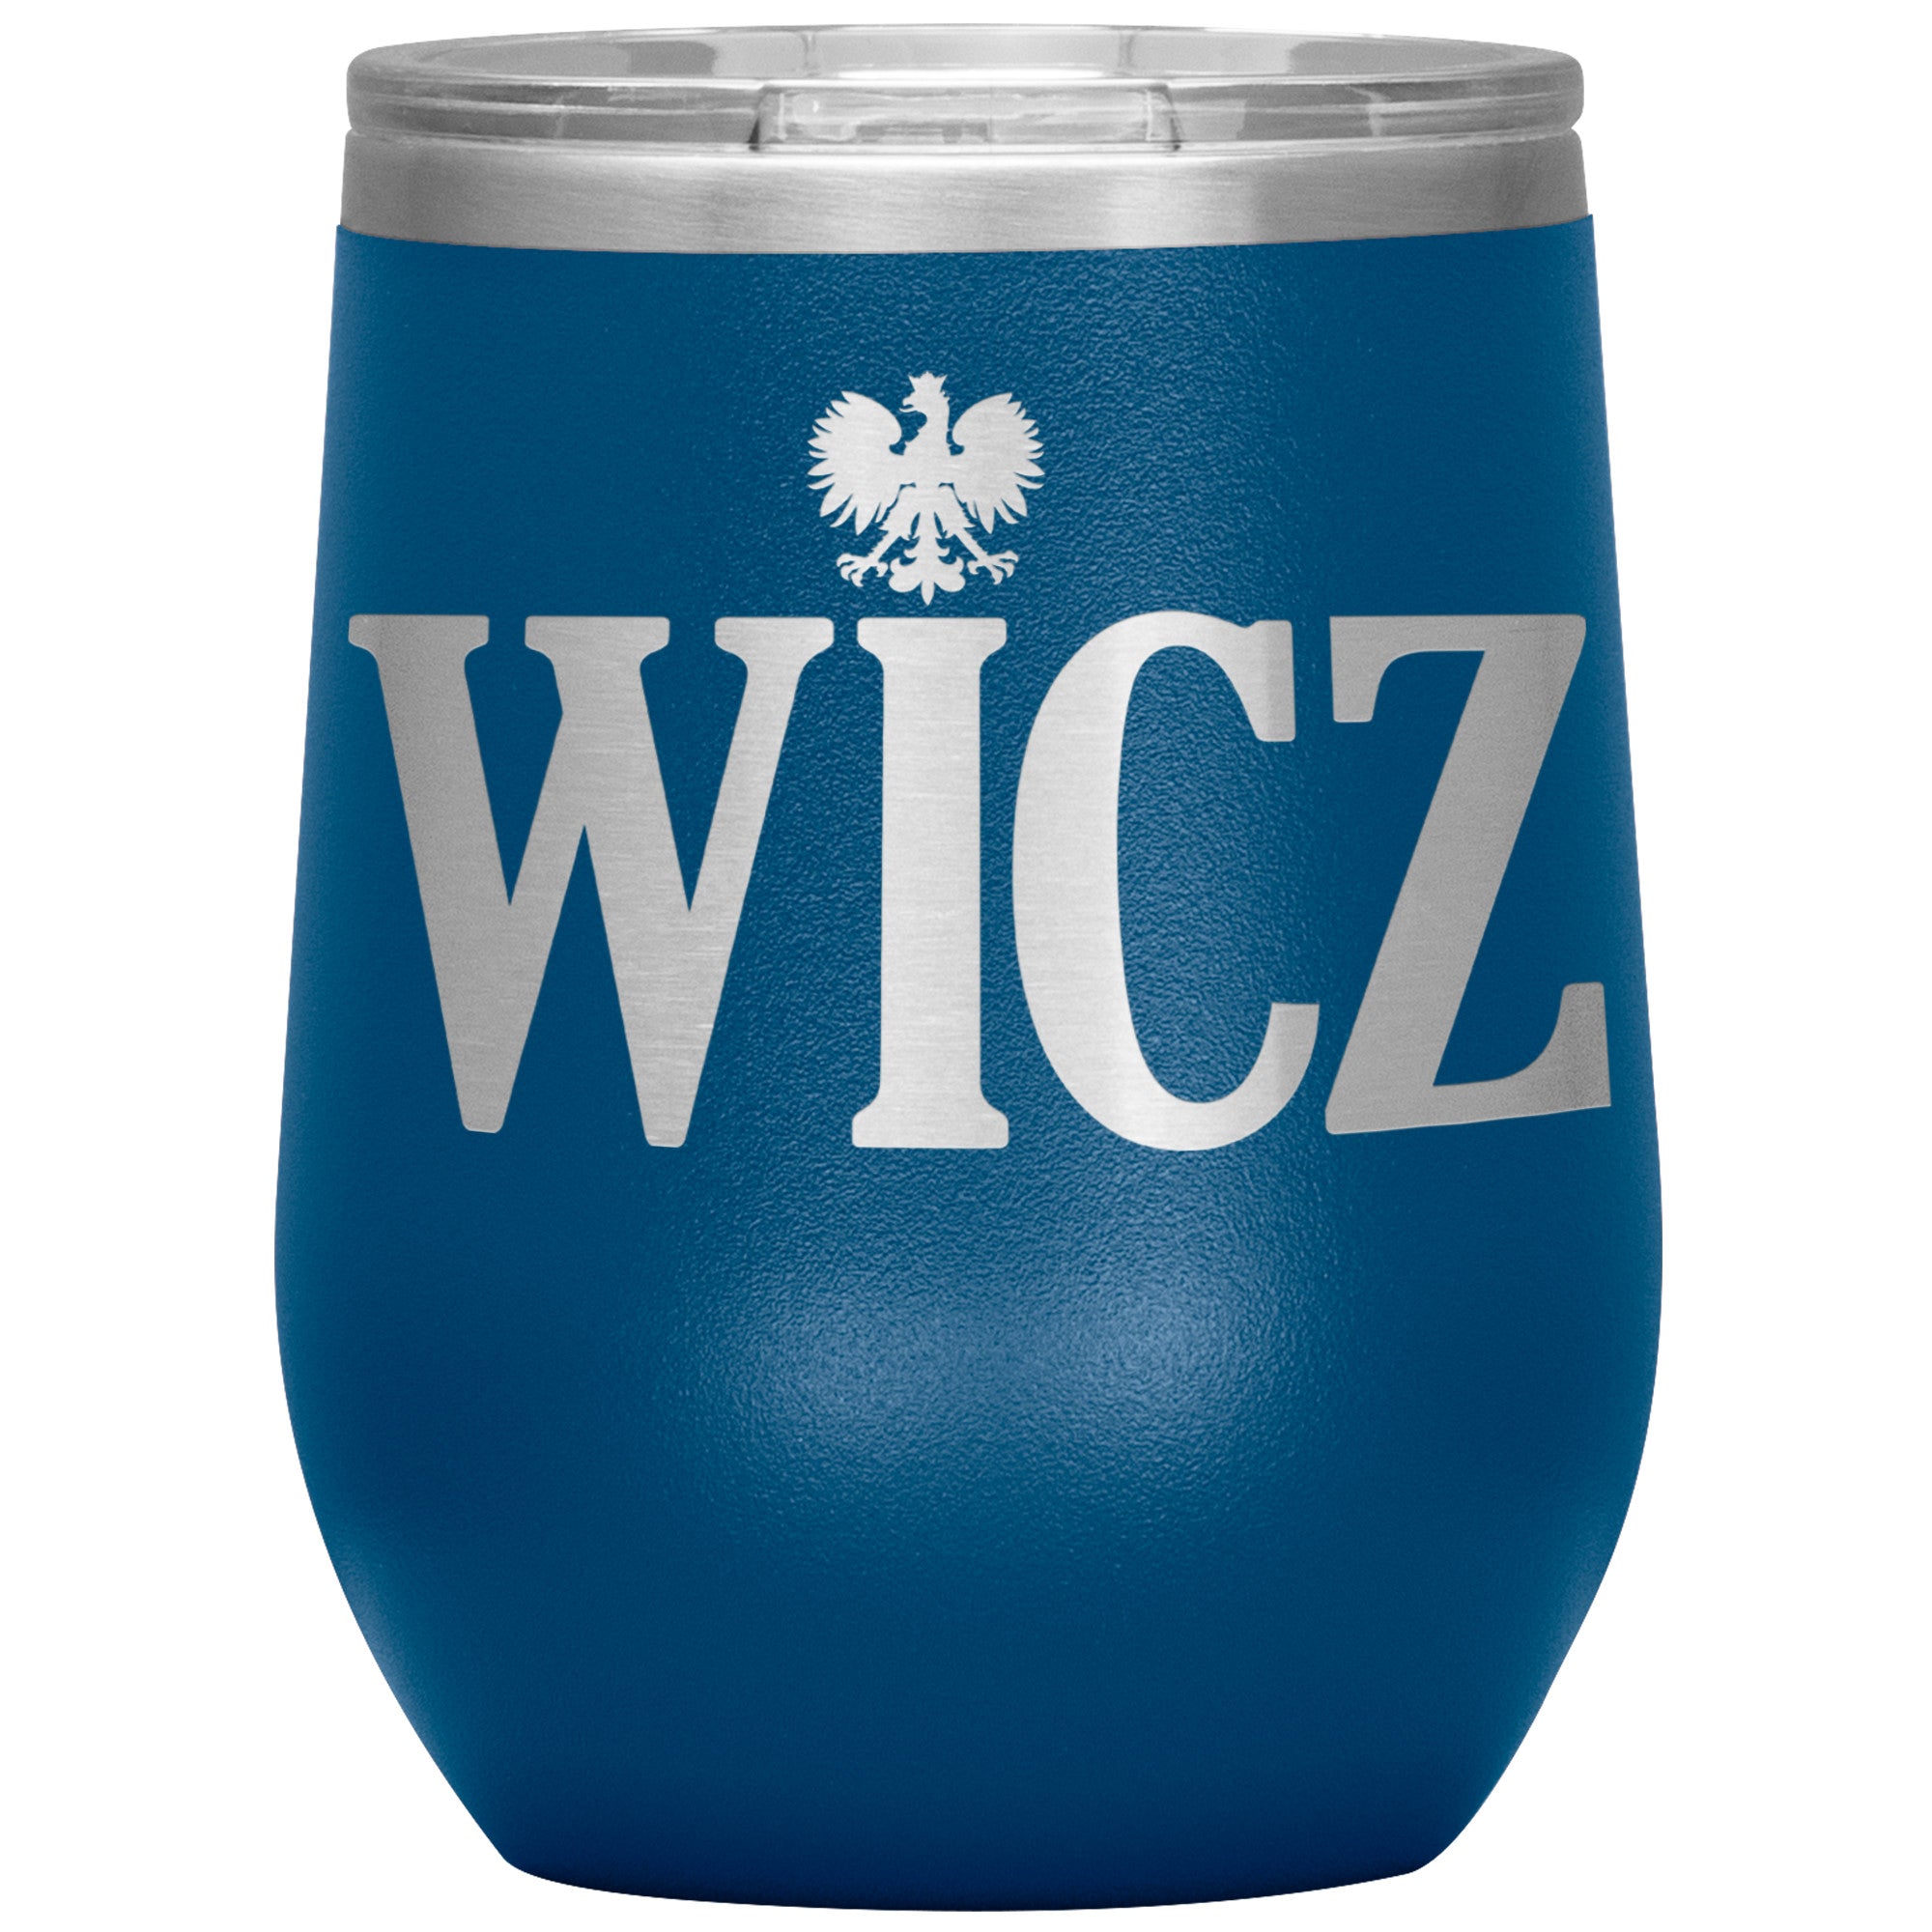 Polish Surname Ending in WICZ Insulated Wine Tumbler Tumblers teelaunch Blue  